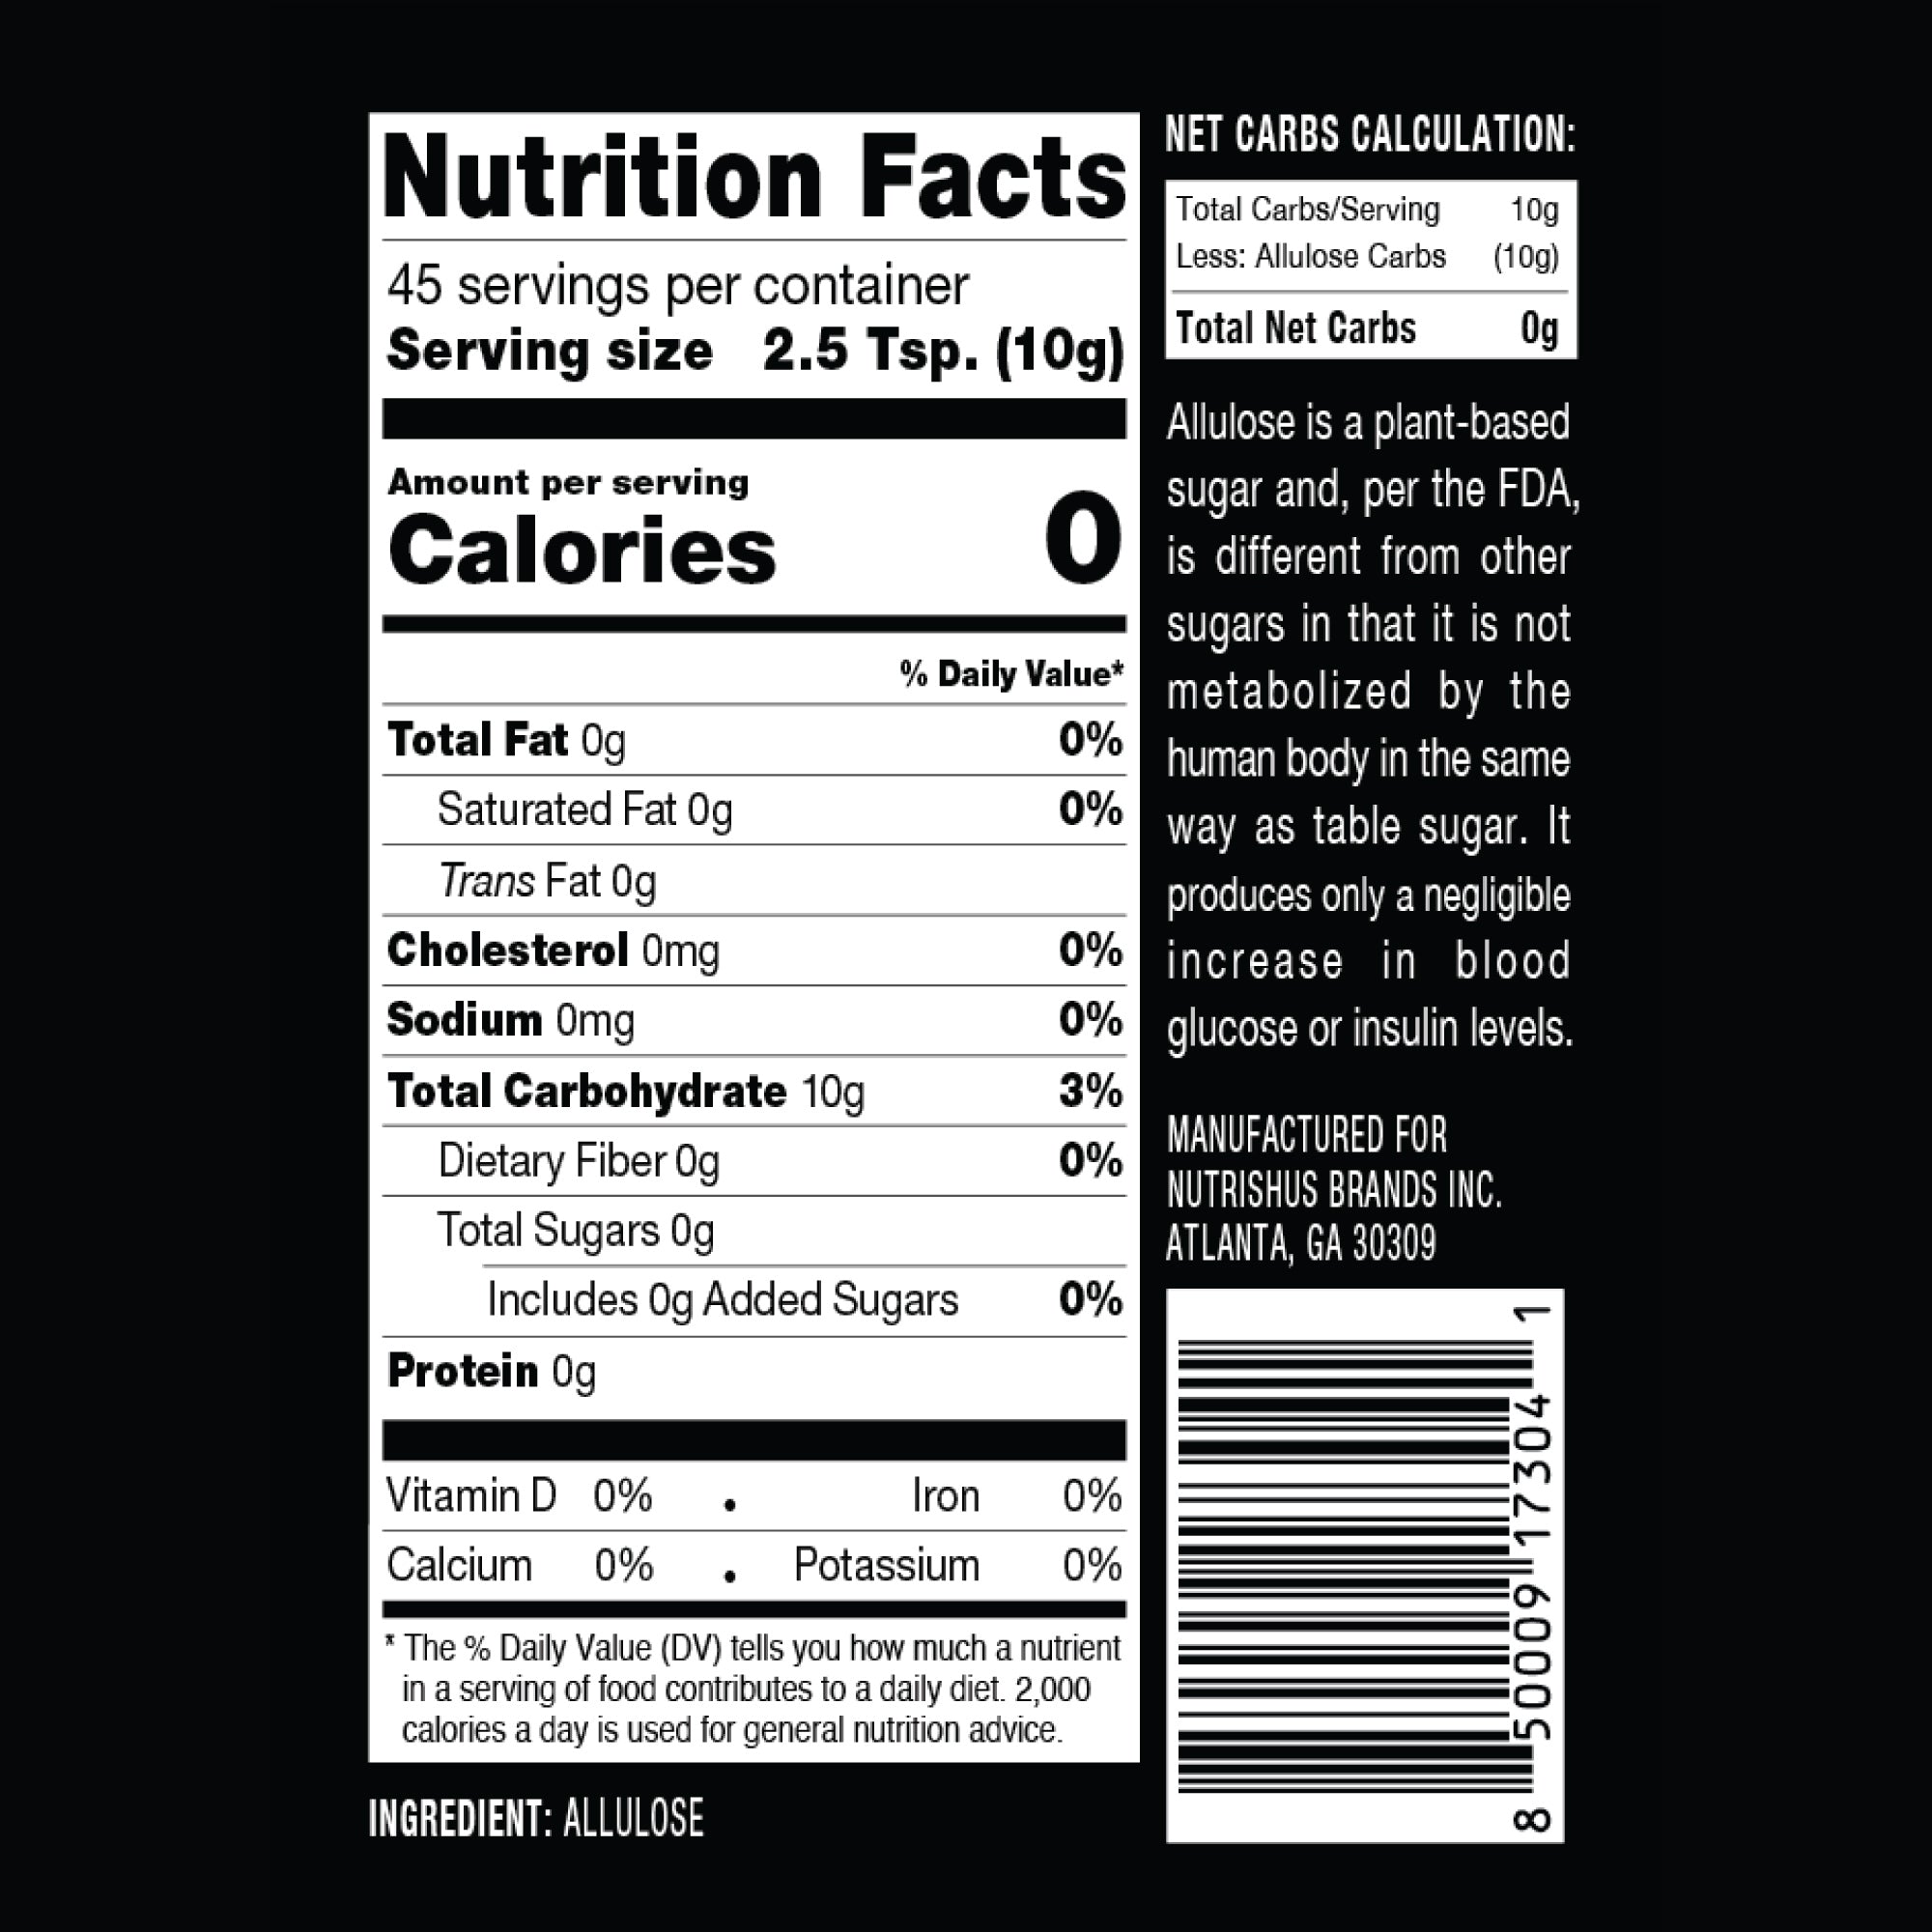 Nutrition Facts for RxSugar 1 Pound Canister product